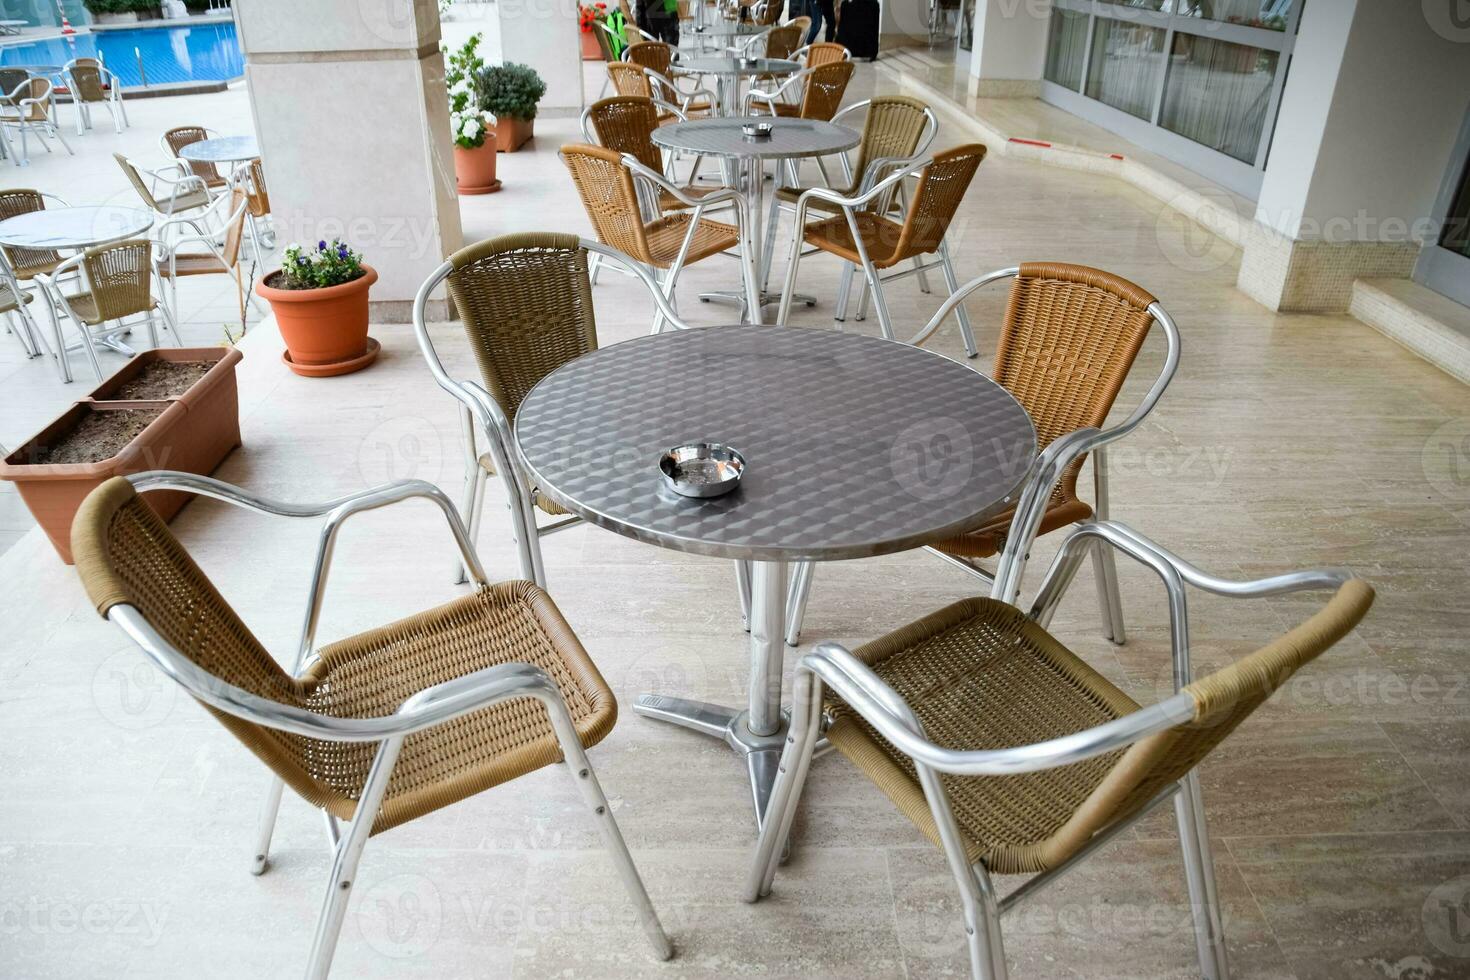 Metal tables and chairs with wicker seats in outdoor cafe. photo